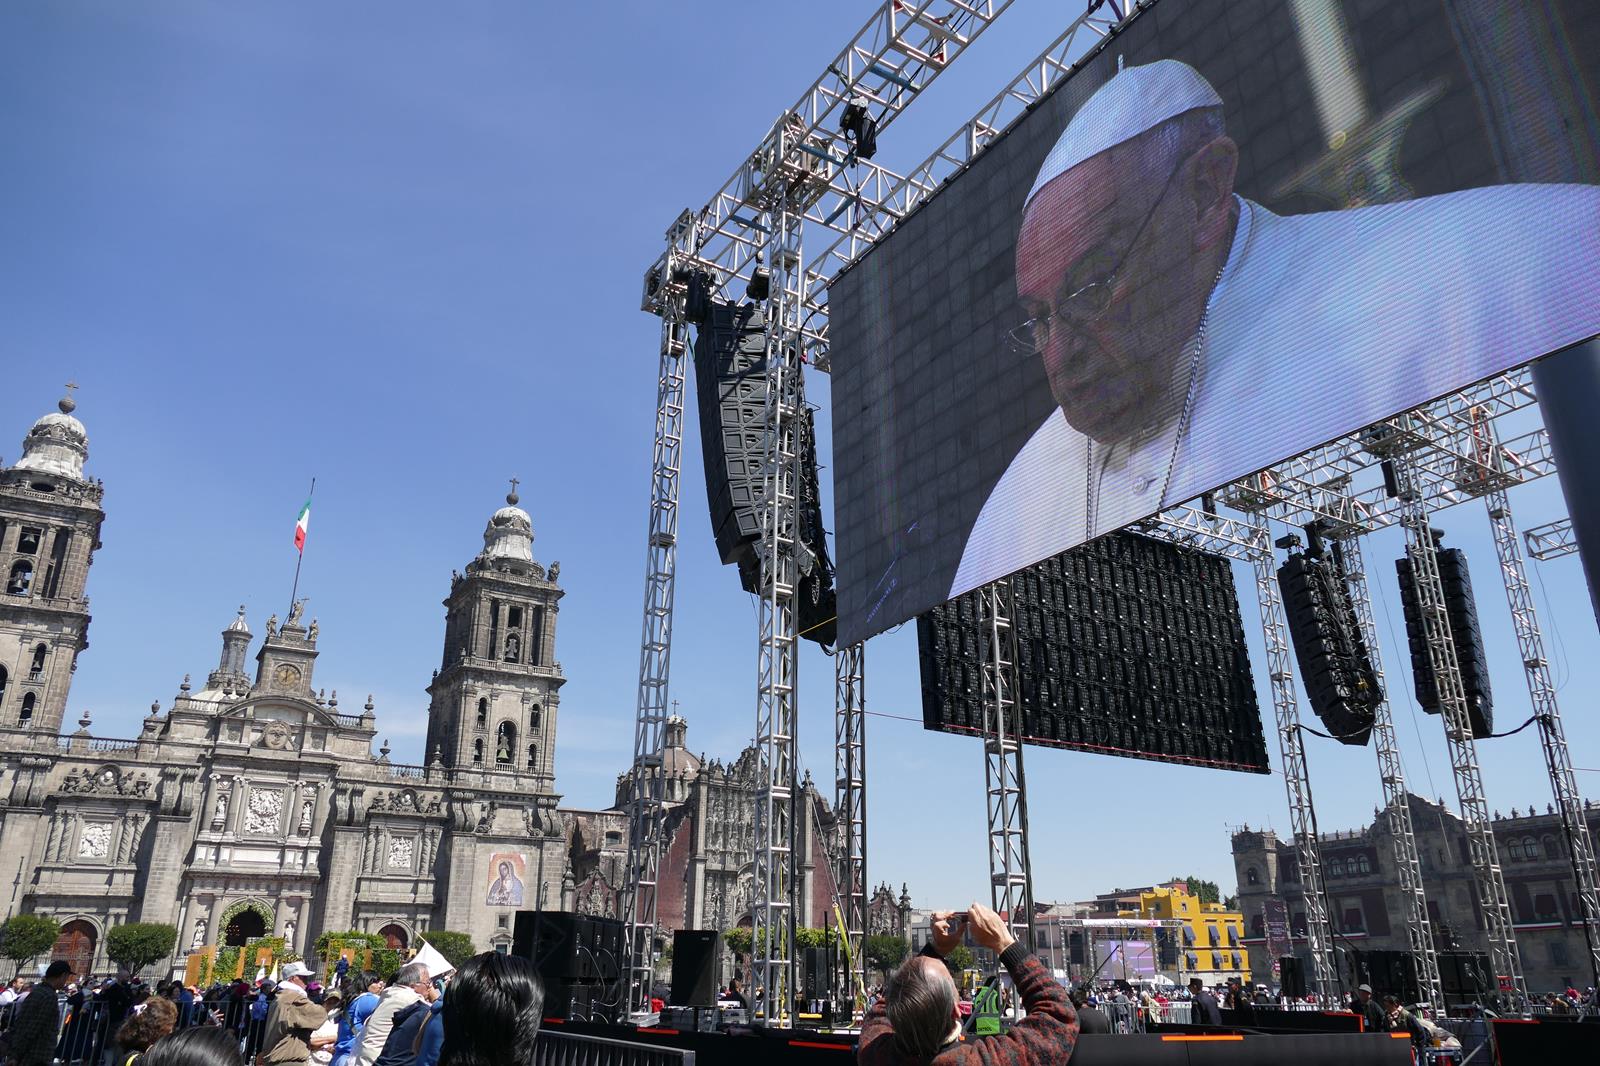 STM FOR EL PAPA IN MEXICO CITY